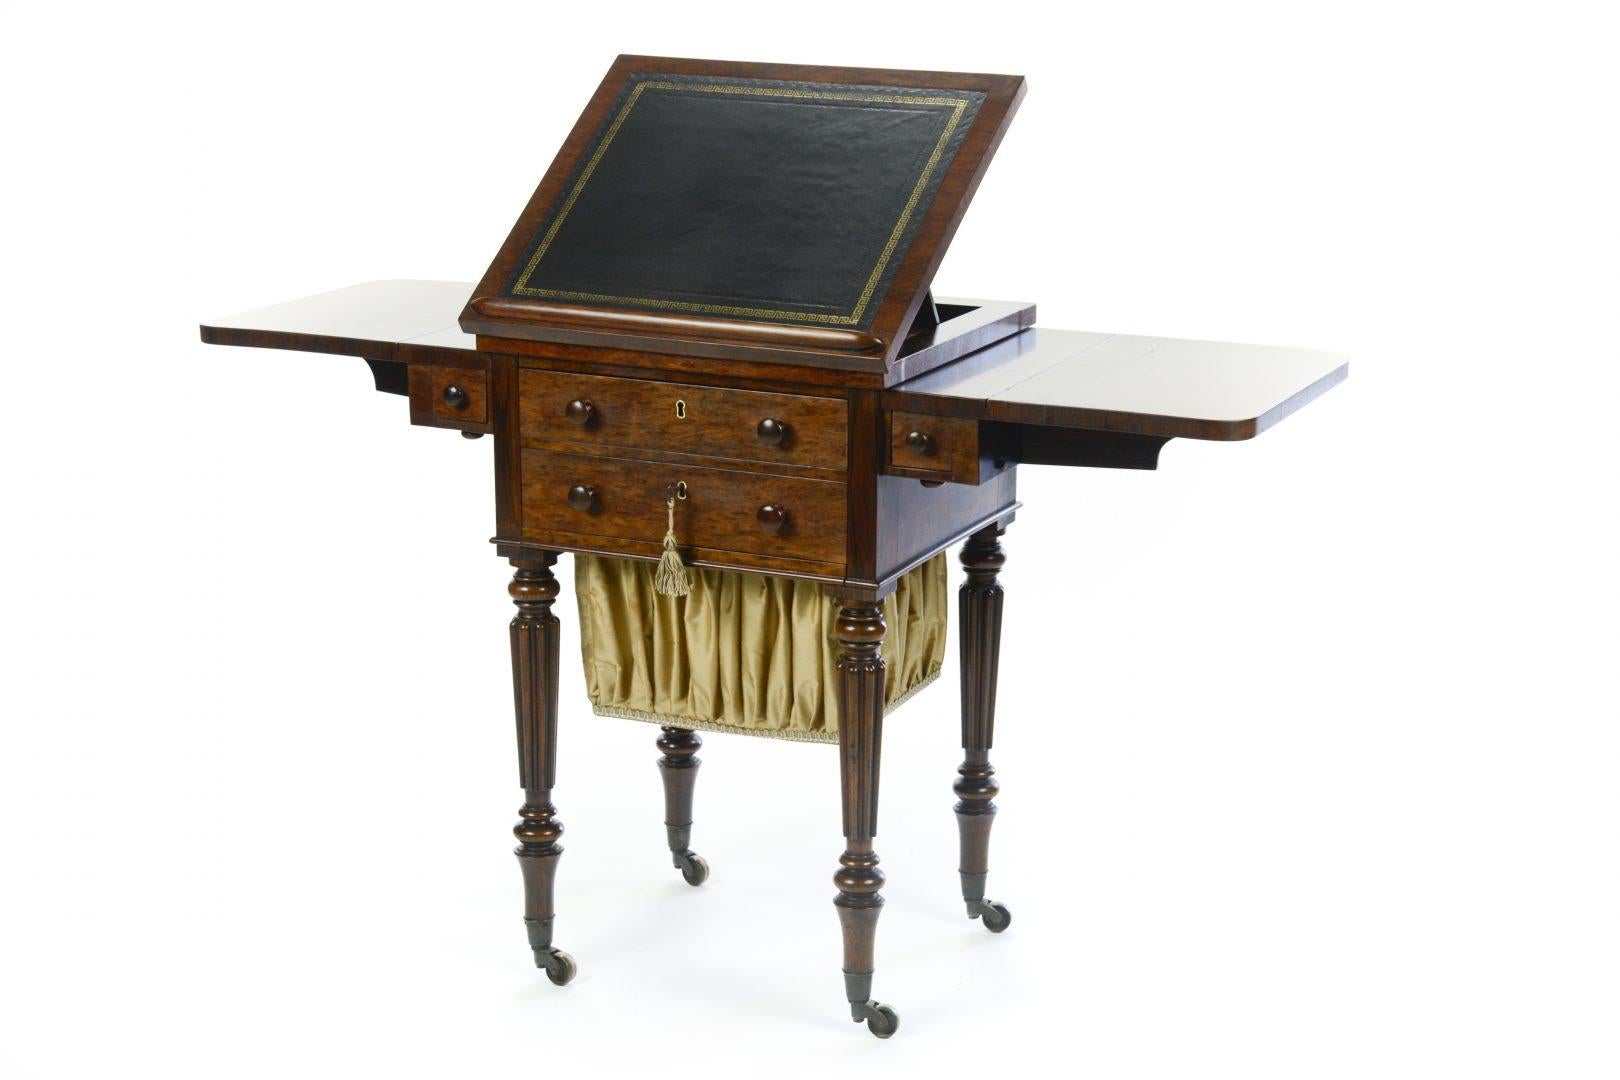 Gillows, early 19th century rosewood drop leaf work table, with a writing slope that slides forward to facilitate its use as a desk, also fitted with two pen draws, also with two draws and a removable sewing basket. Stamped Lodge and Co. Lodge and